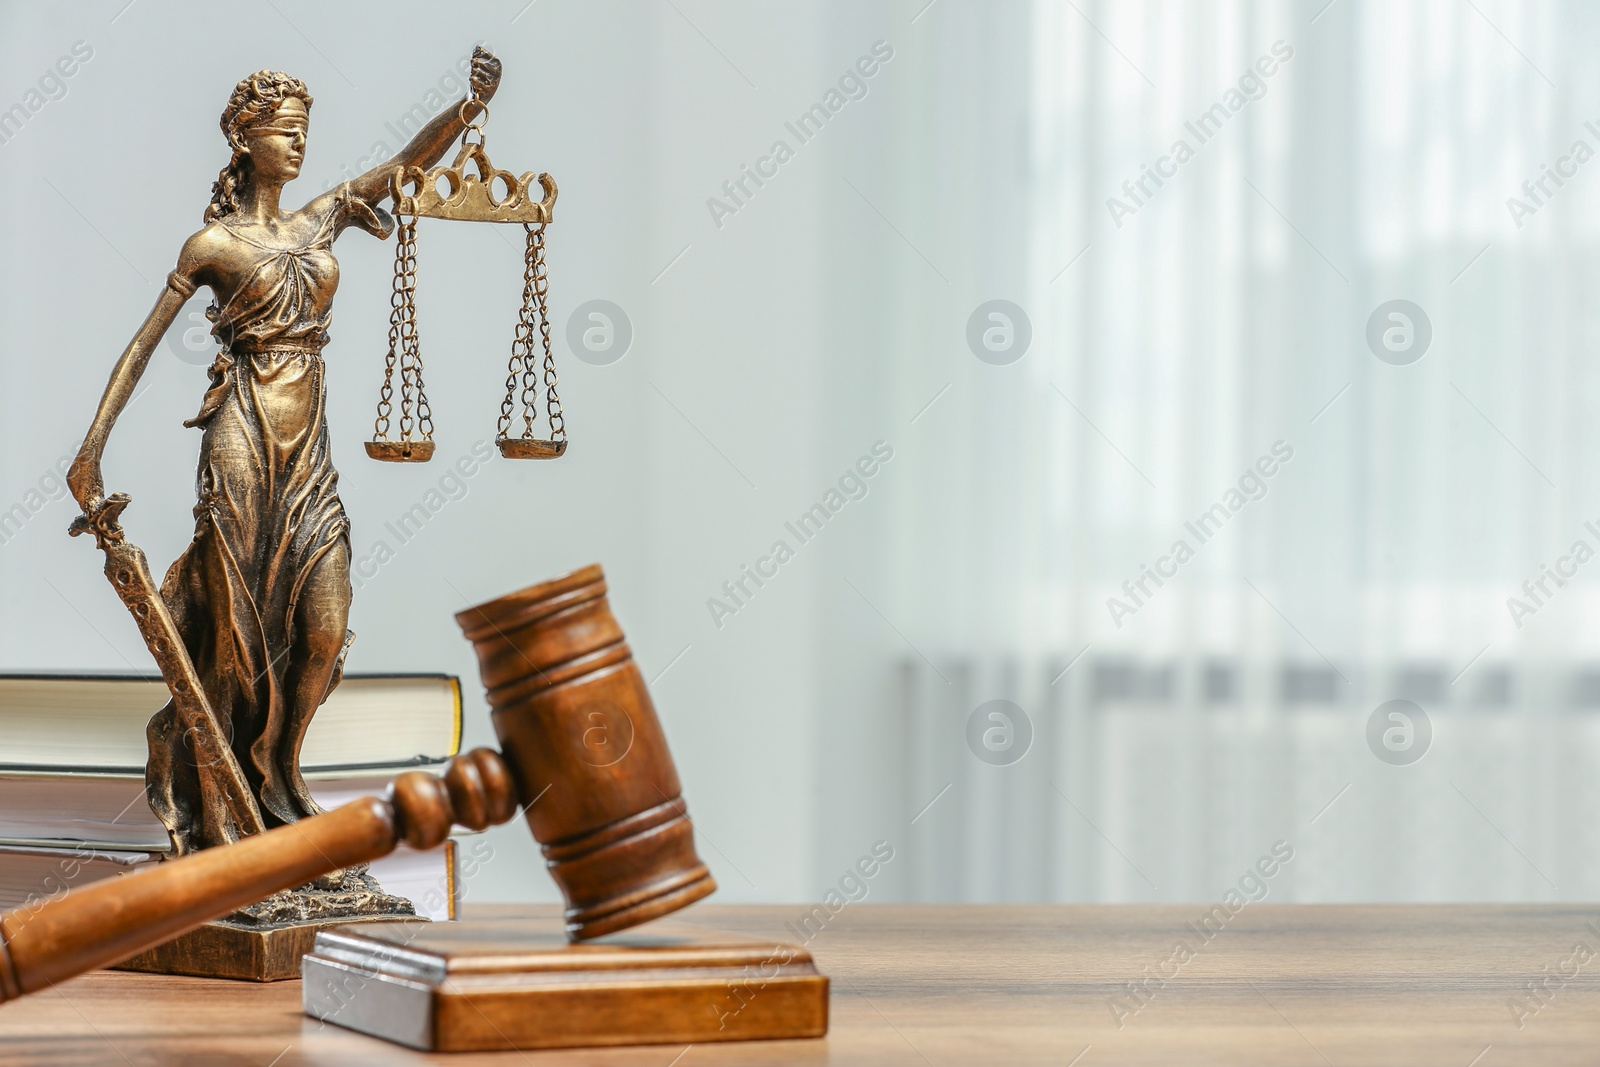 Photo of Figure of Lady Justice, gavel and books on table indoors, space for text. Symbol of fair treatment under law